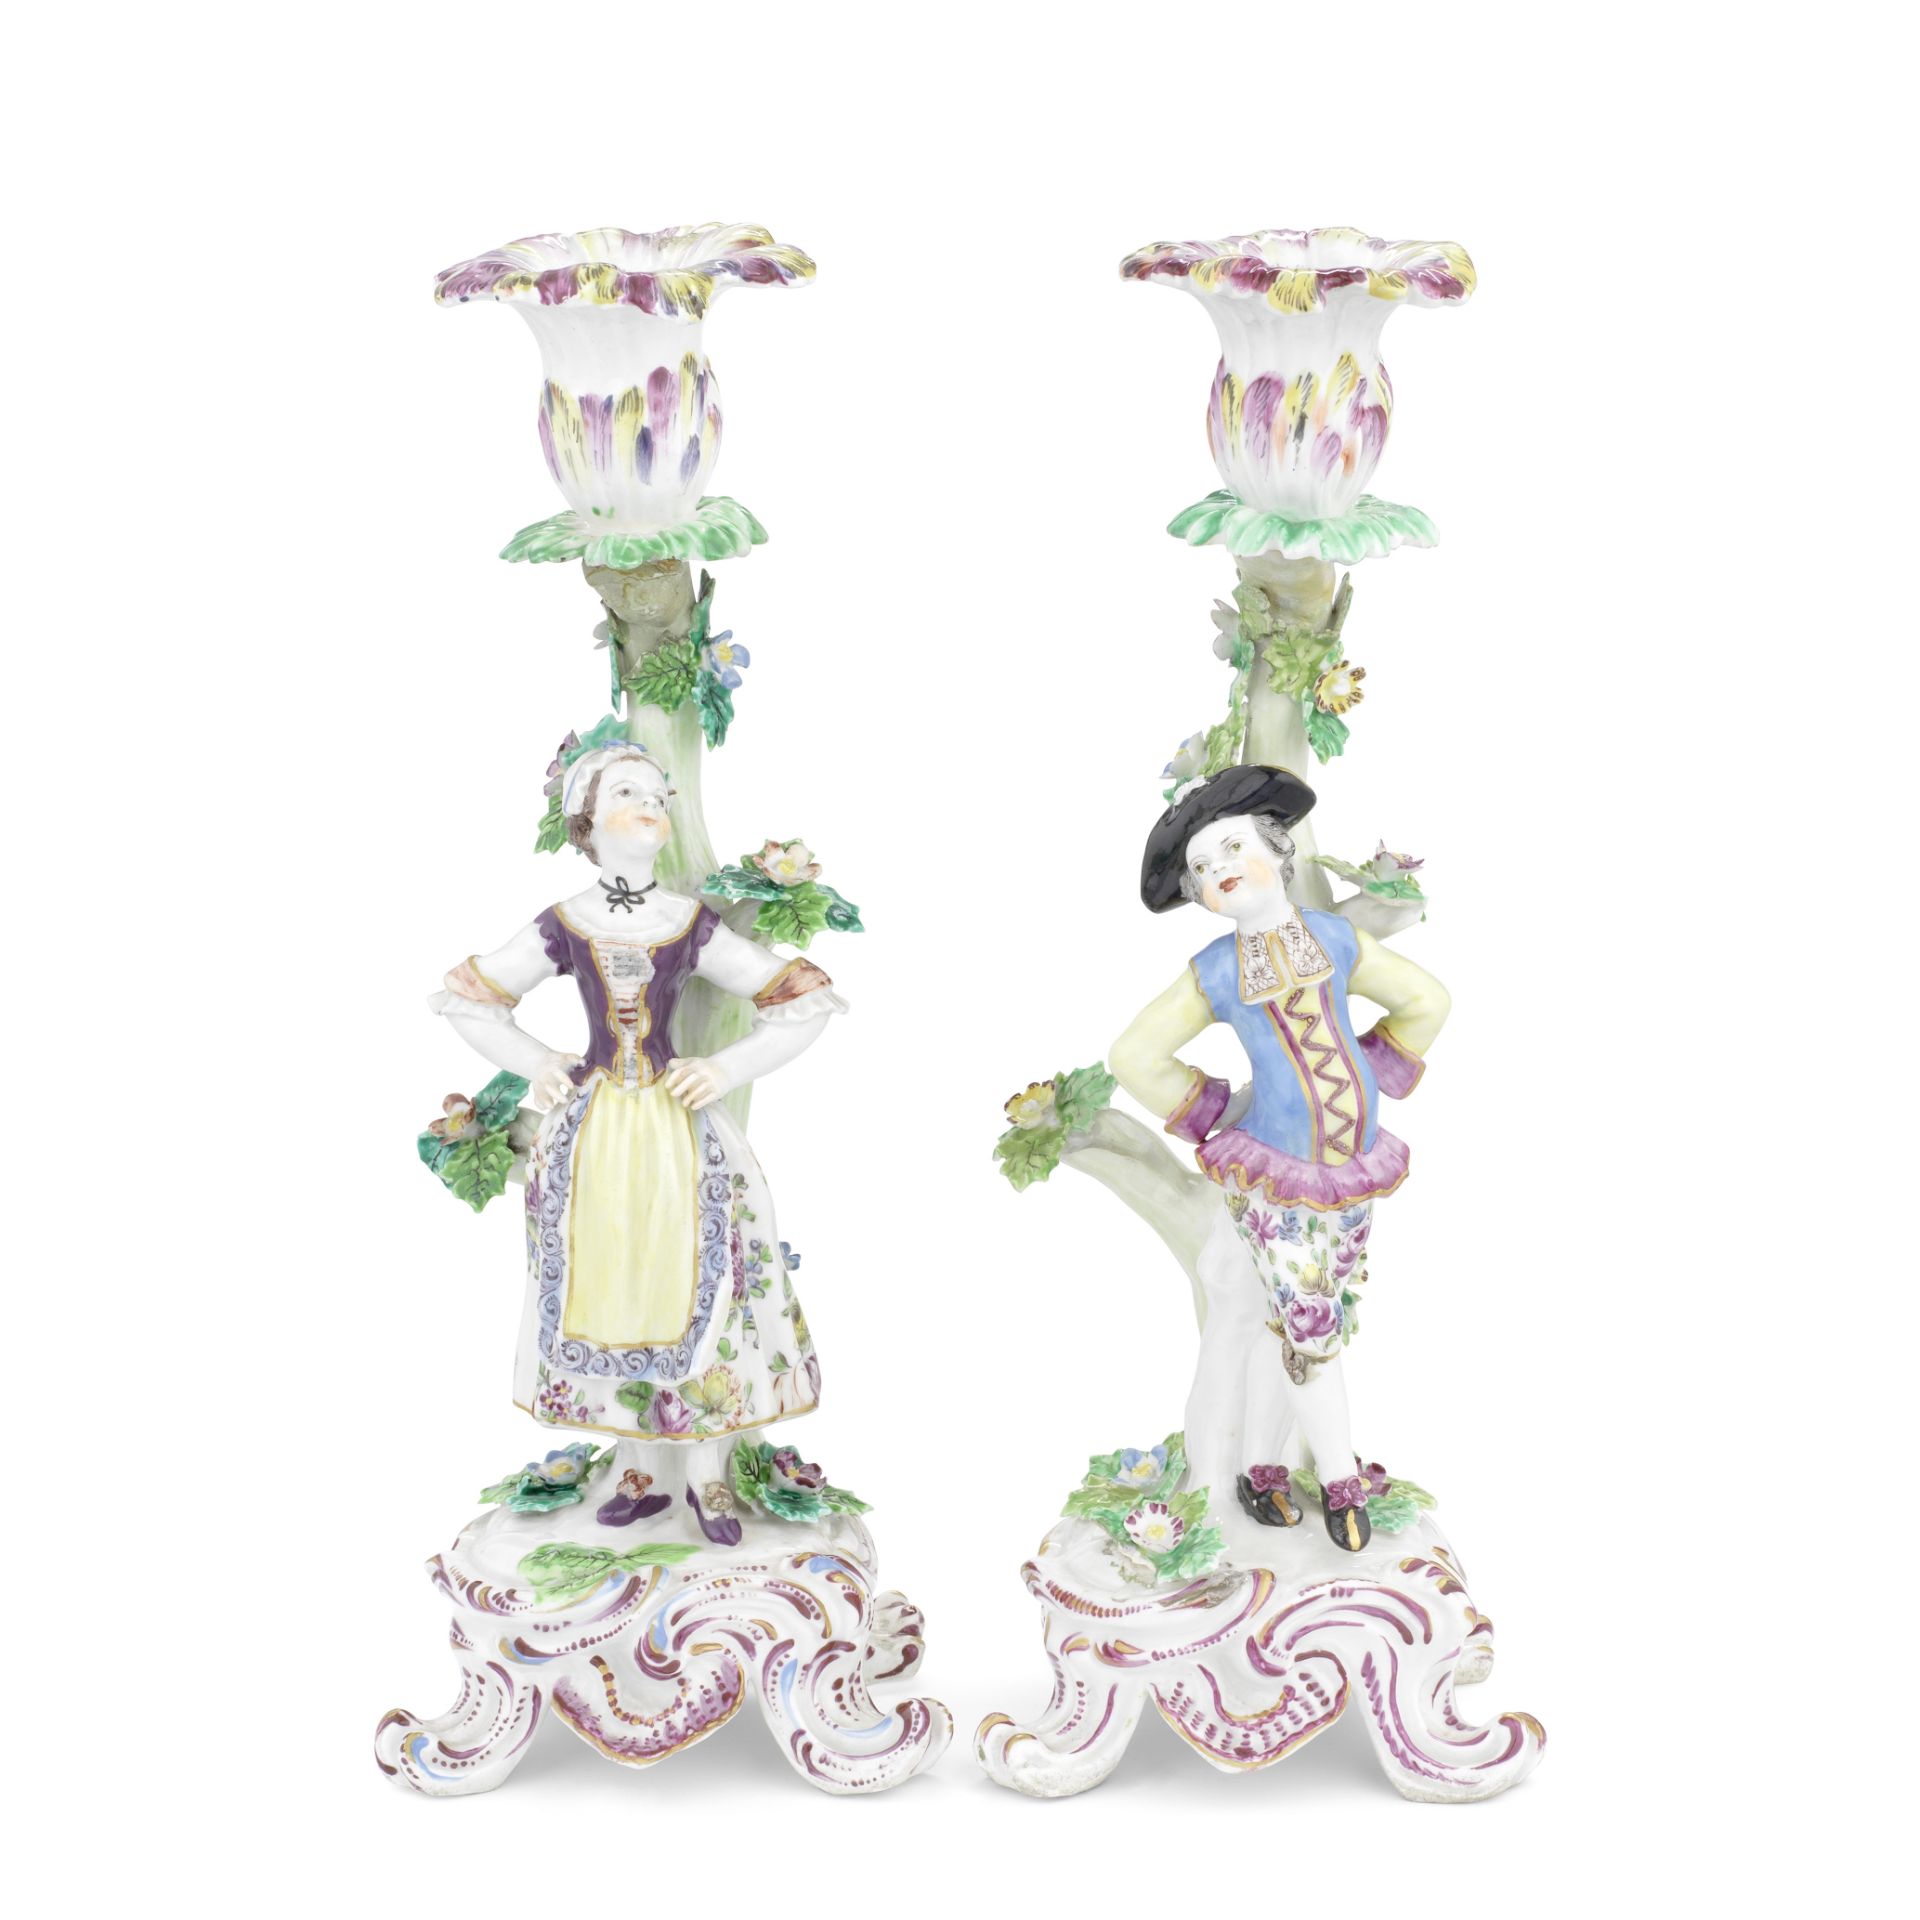 A pair of Bow candlestick figures of 'Dutch Dancers', circa 1765